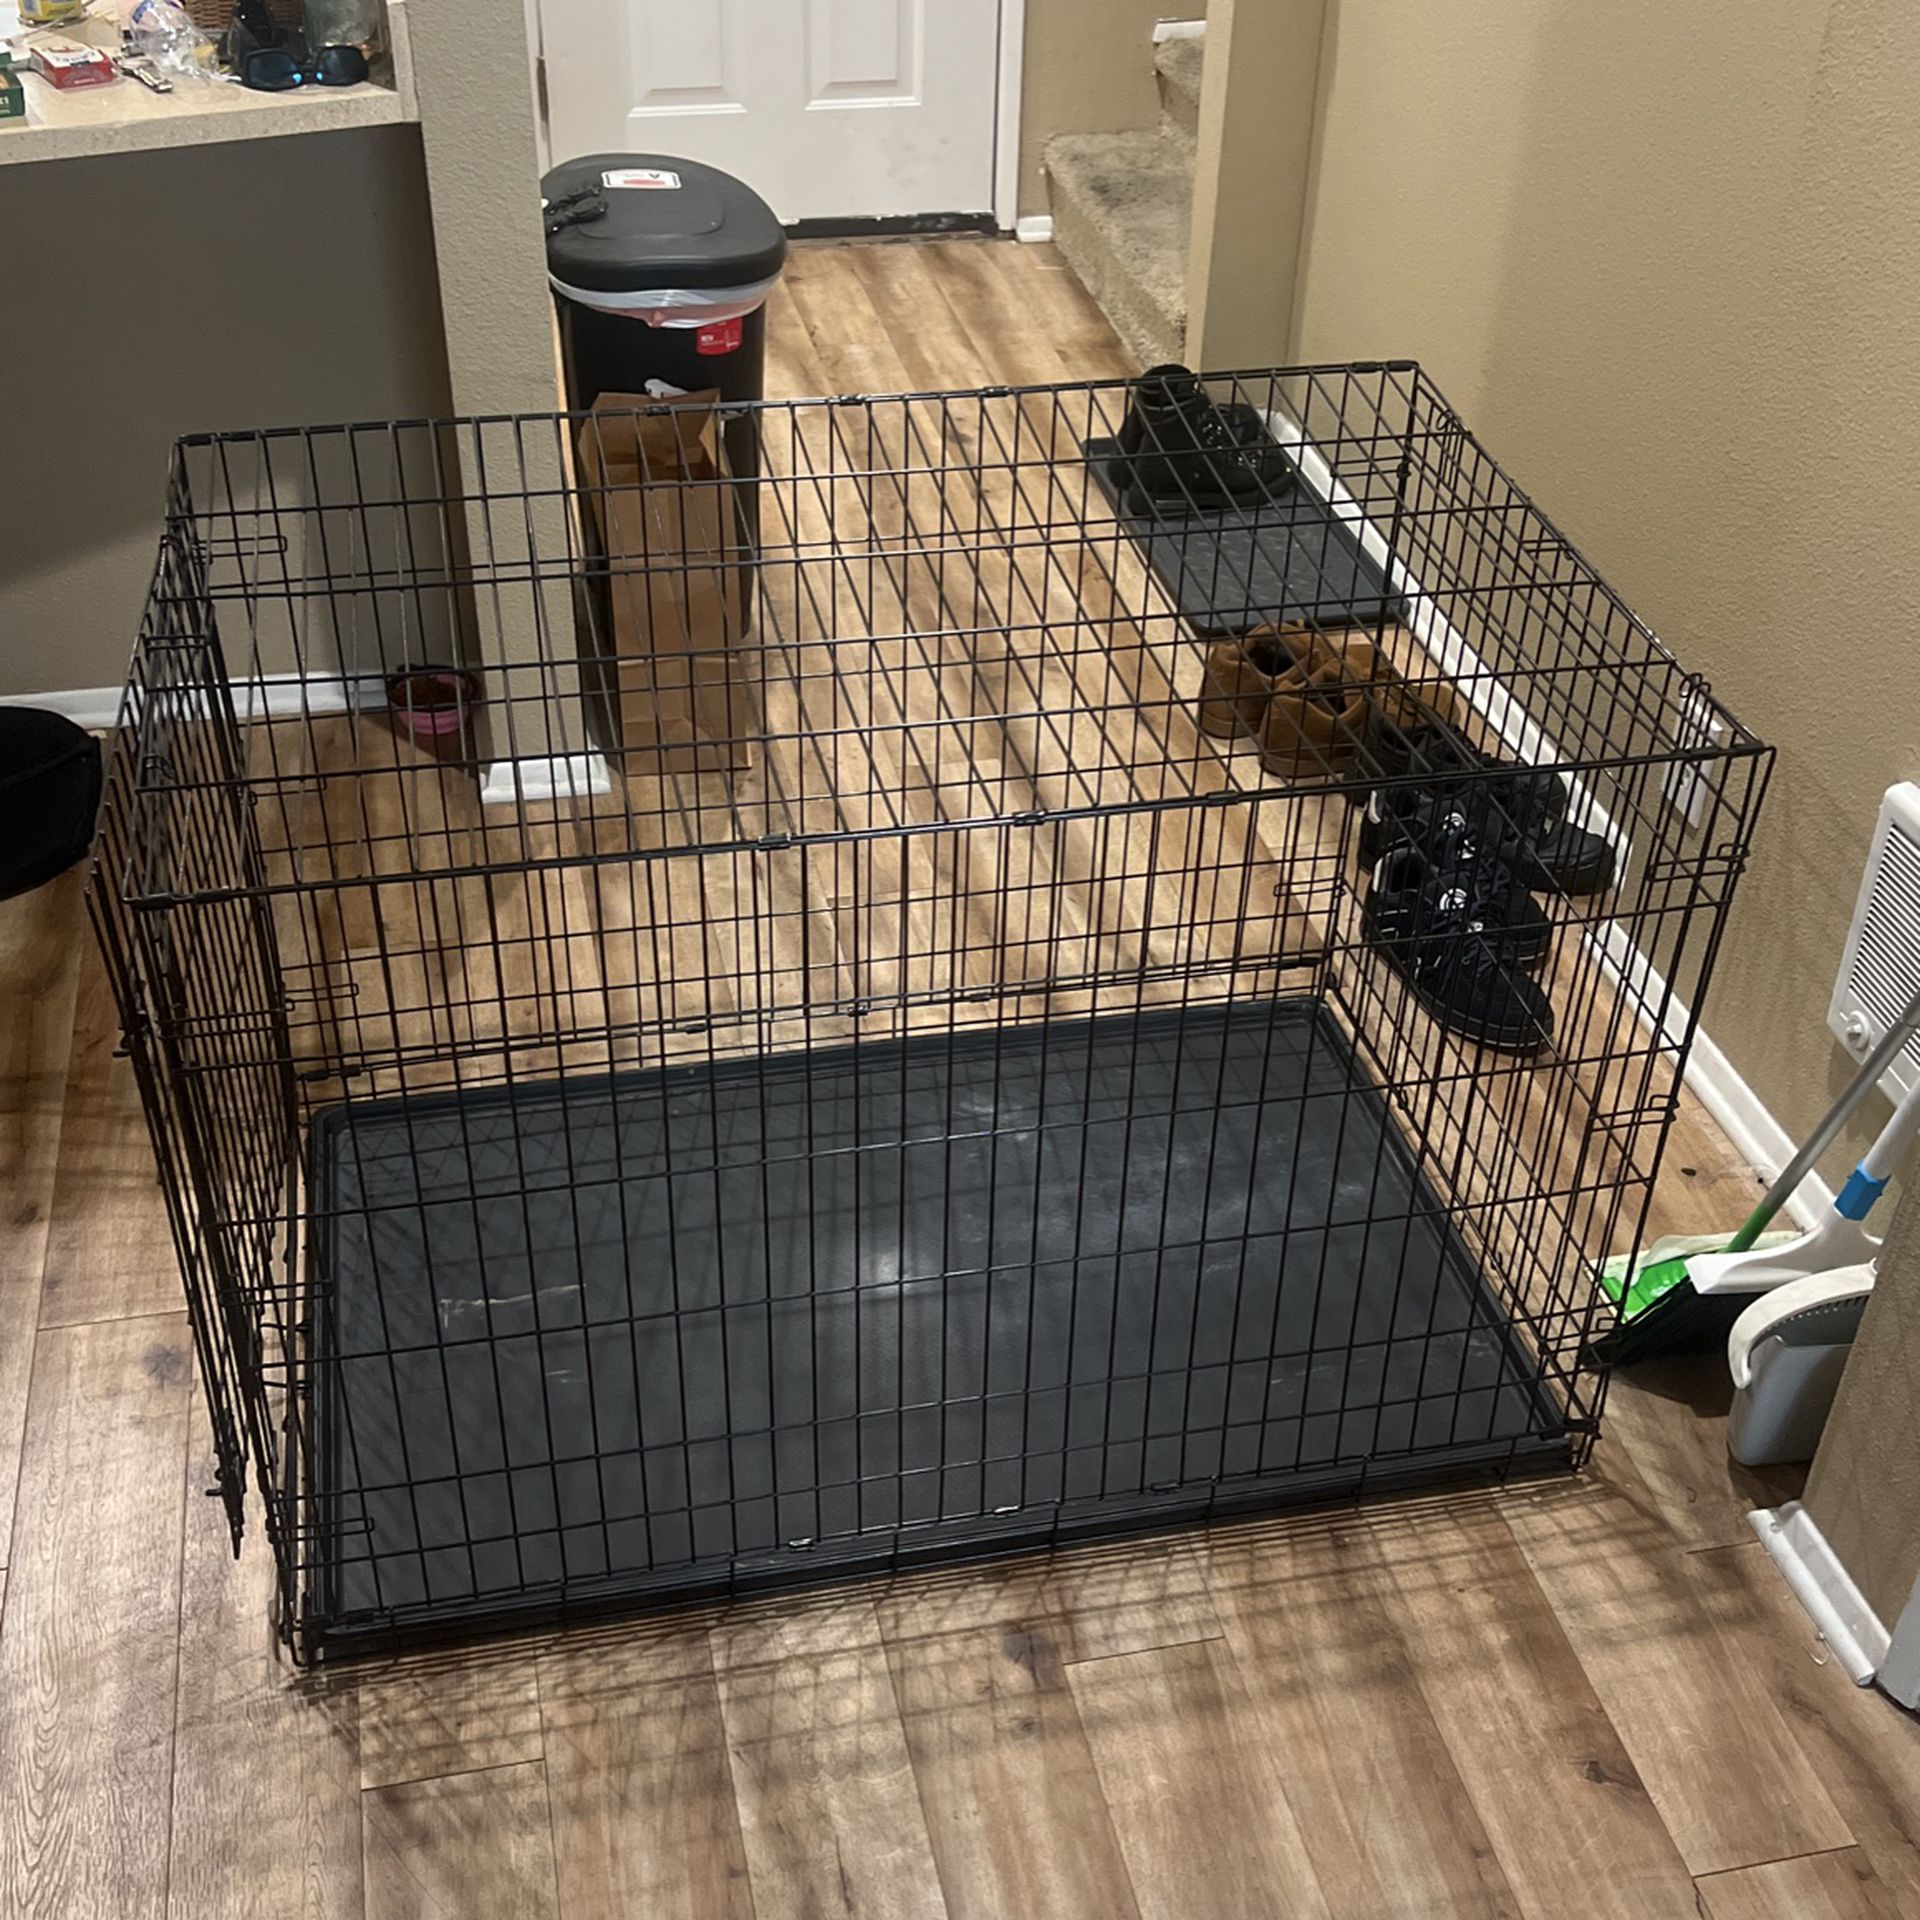 Icrate Dog crate